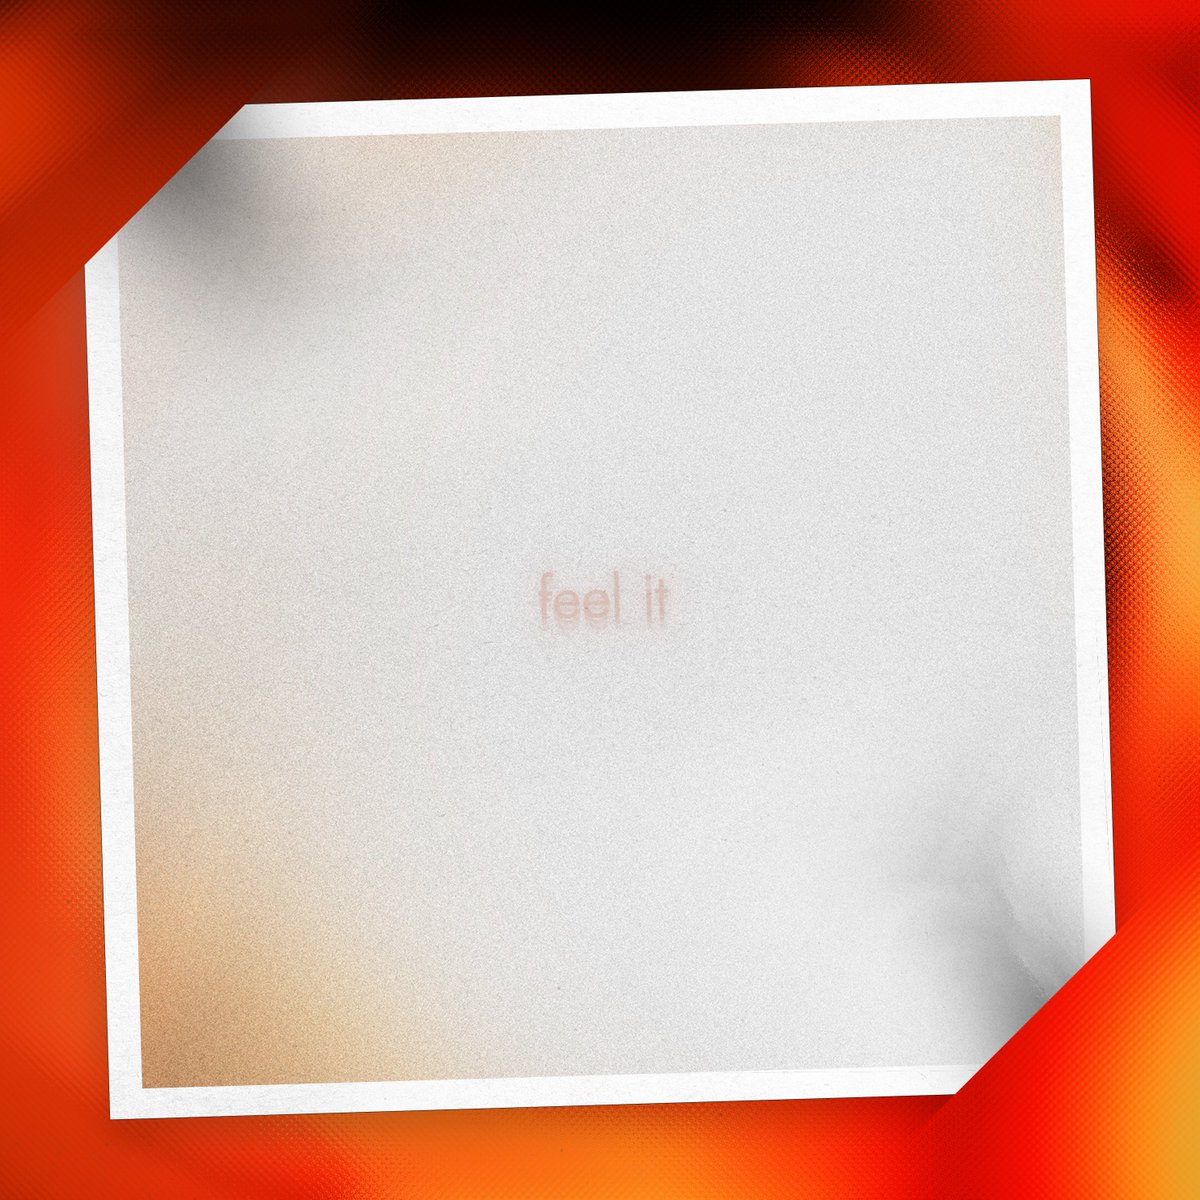 The crucial things to know about newshapes is that their name is one word, they never use capitals, and they write some canny good songs. This is 'feel it'. 📝: @choydivision Read our review: hivemagazine.net/music-reviews/…